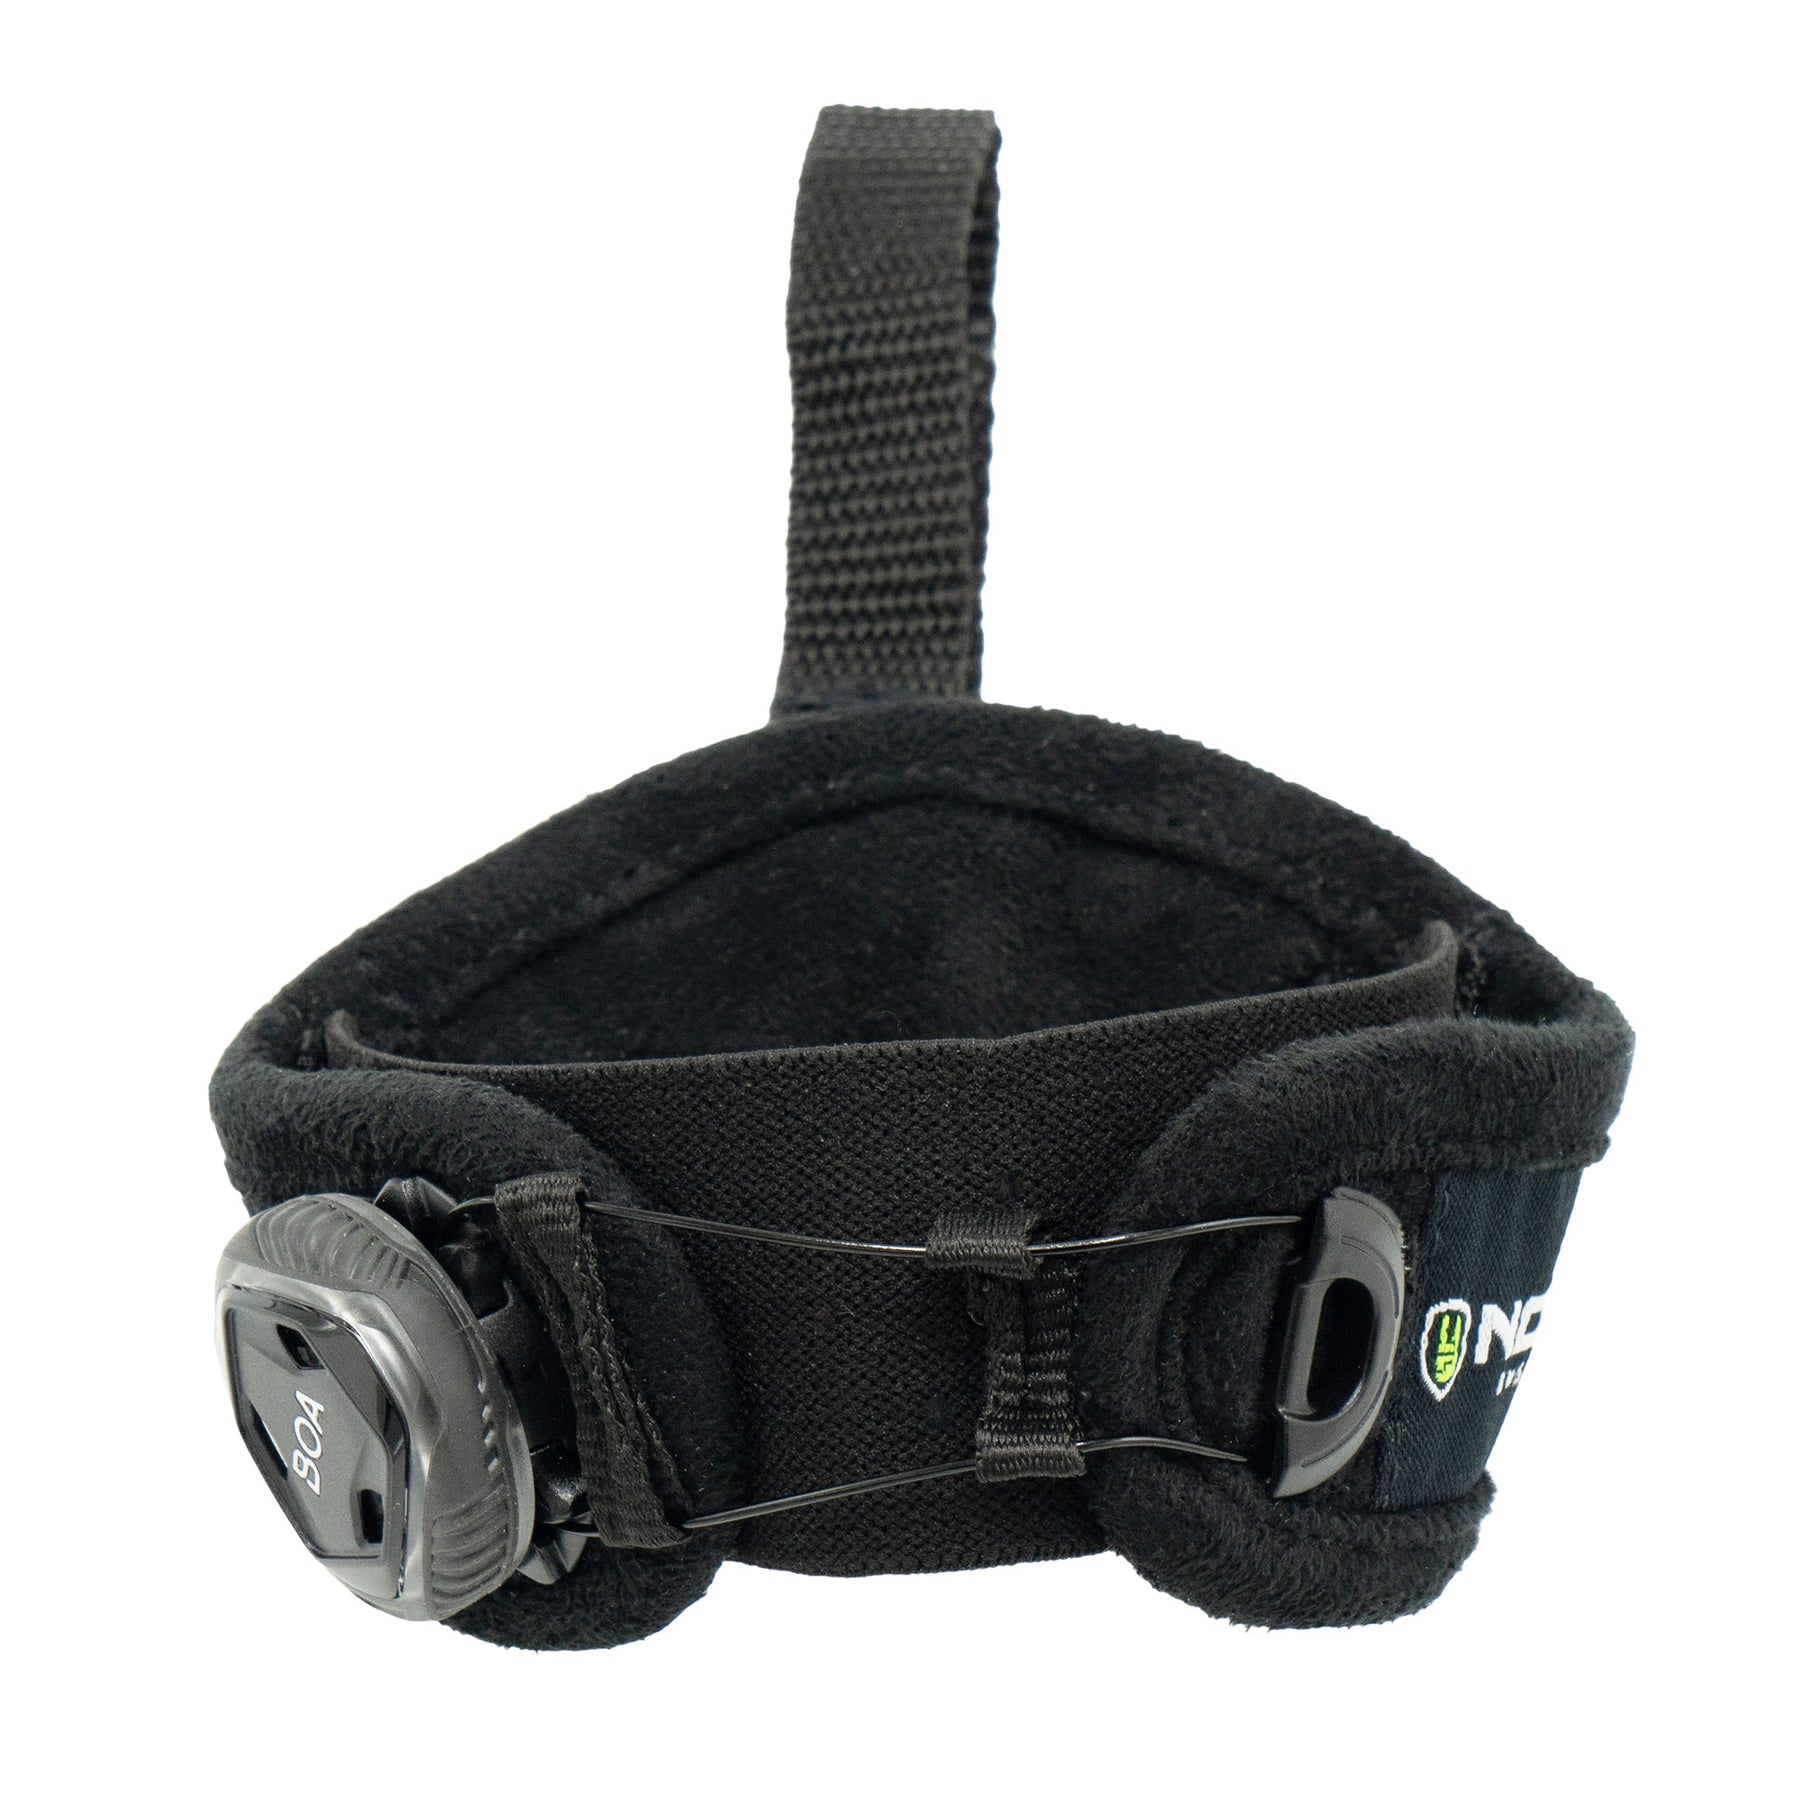  The BackStrap Release It Kit is a Full Body Stretching